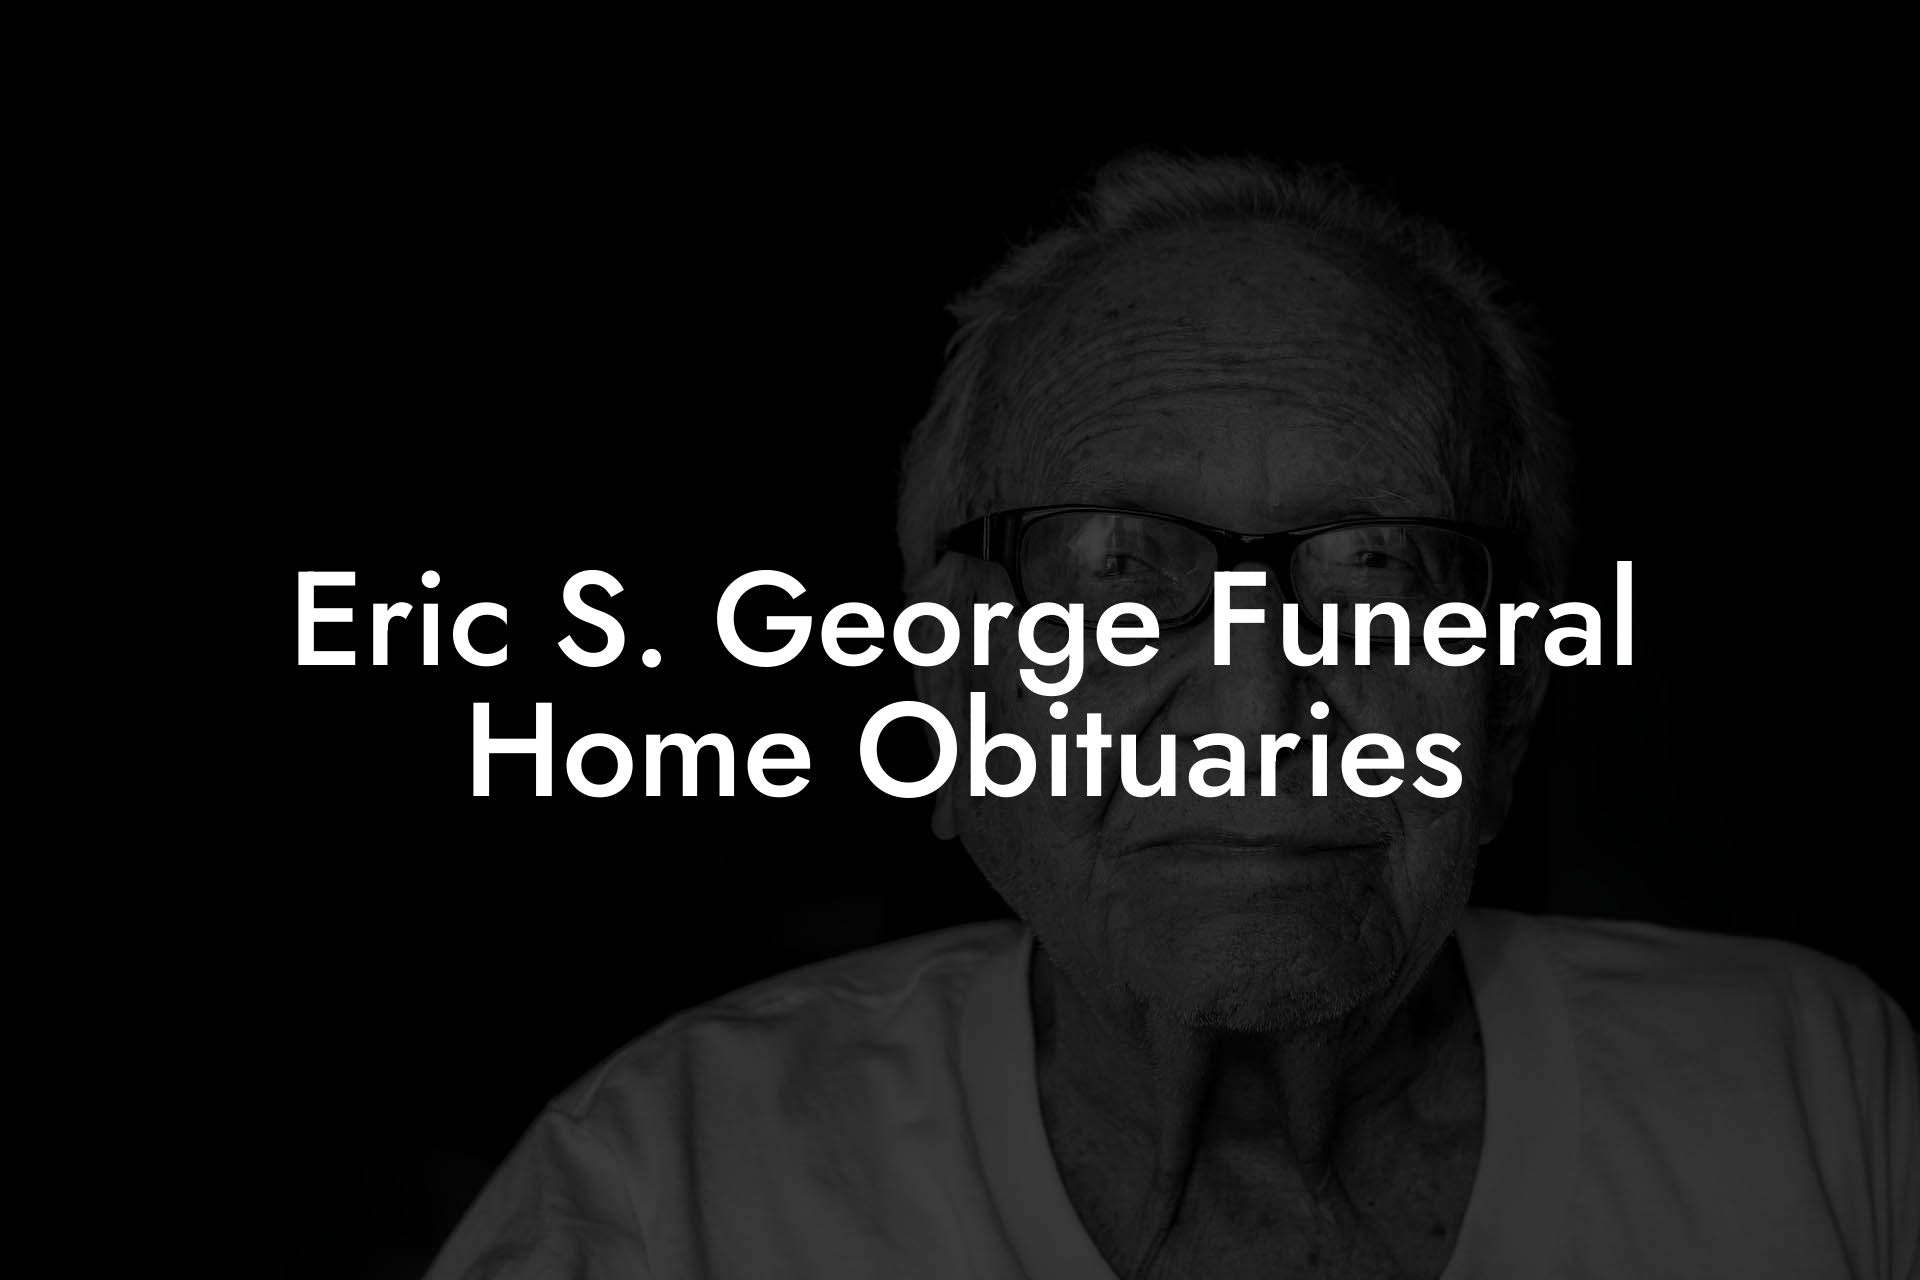 Eric S. George Funeral Home Obituaries